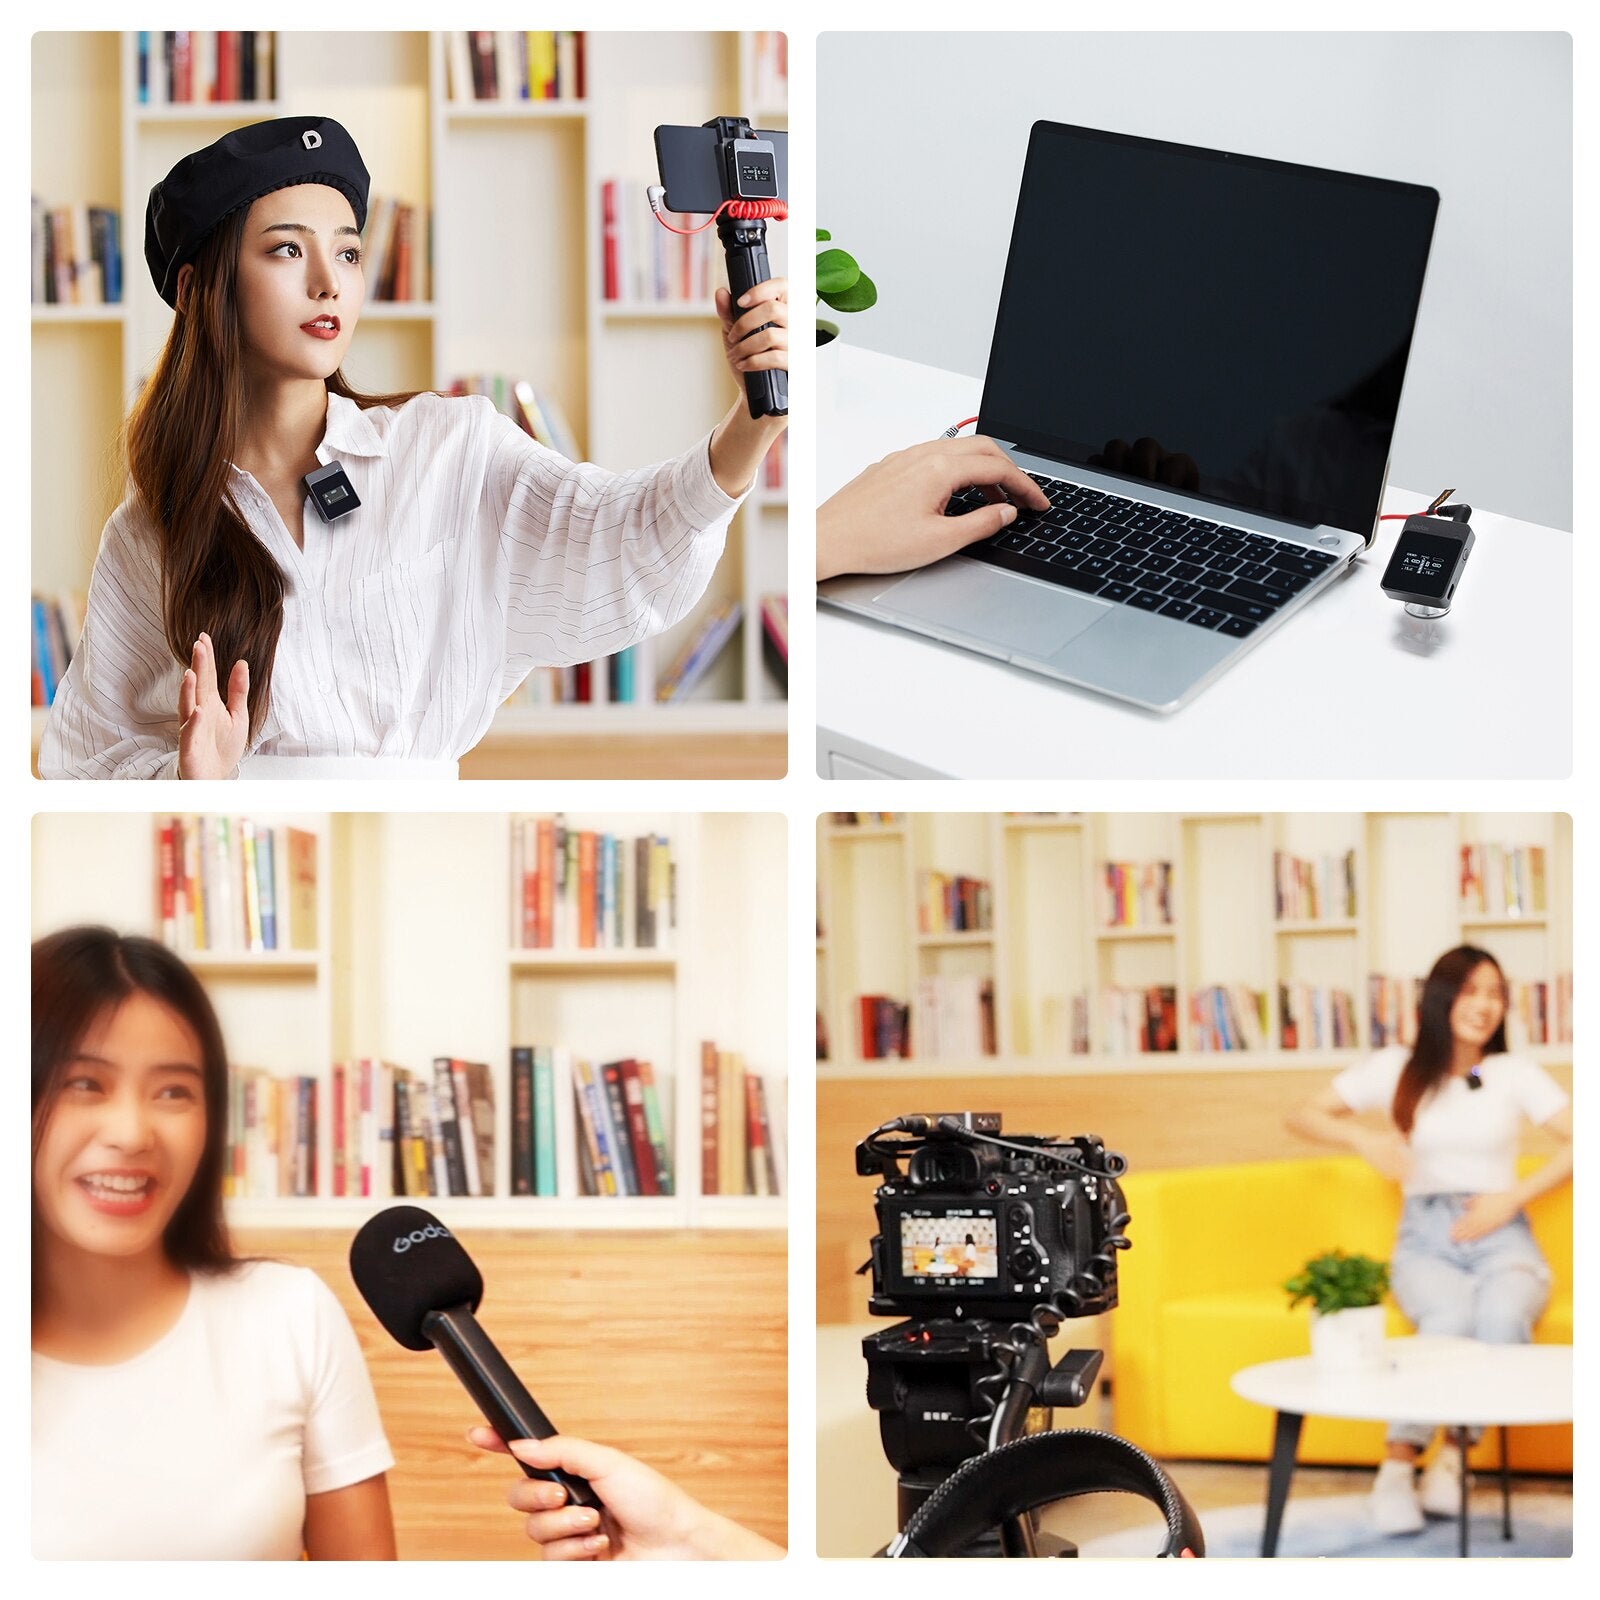 Microphone Bluetooth Movelink M1 M2 2.4Ghz Wireless Lavalier PC Camera Microphone Professional Mixer Audio Video Shooting